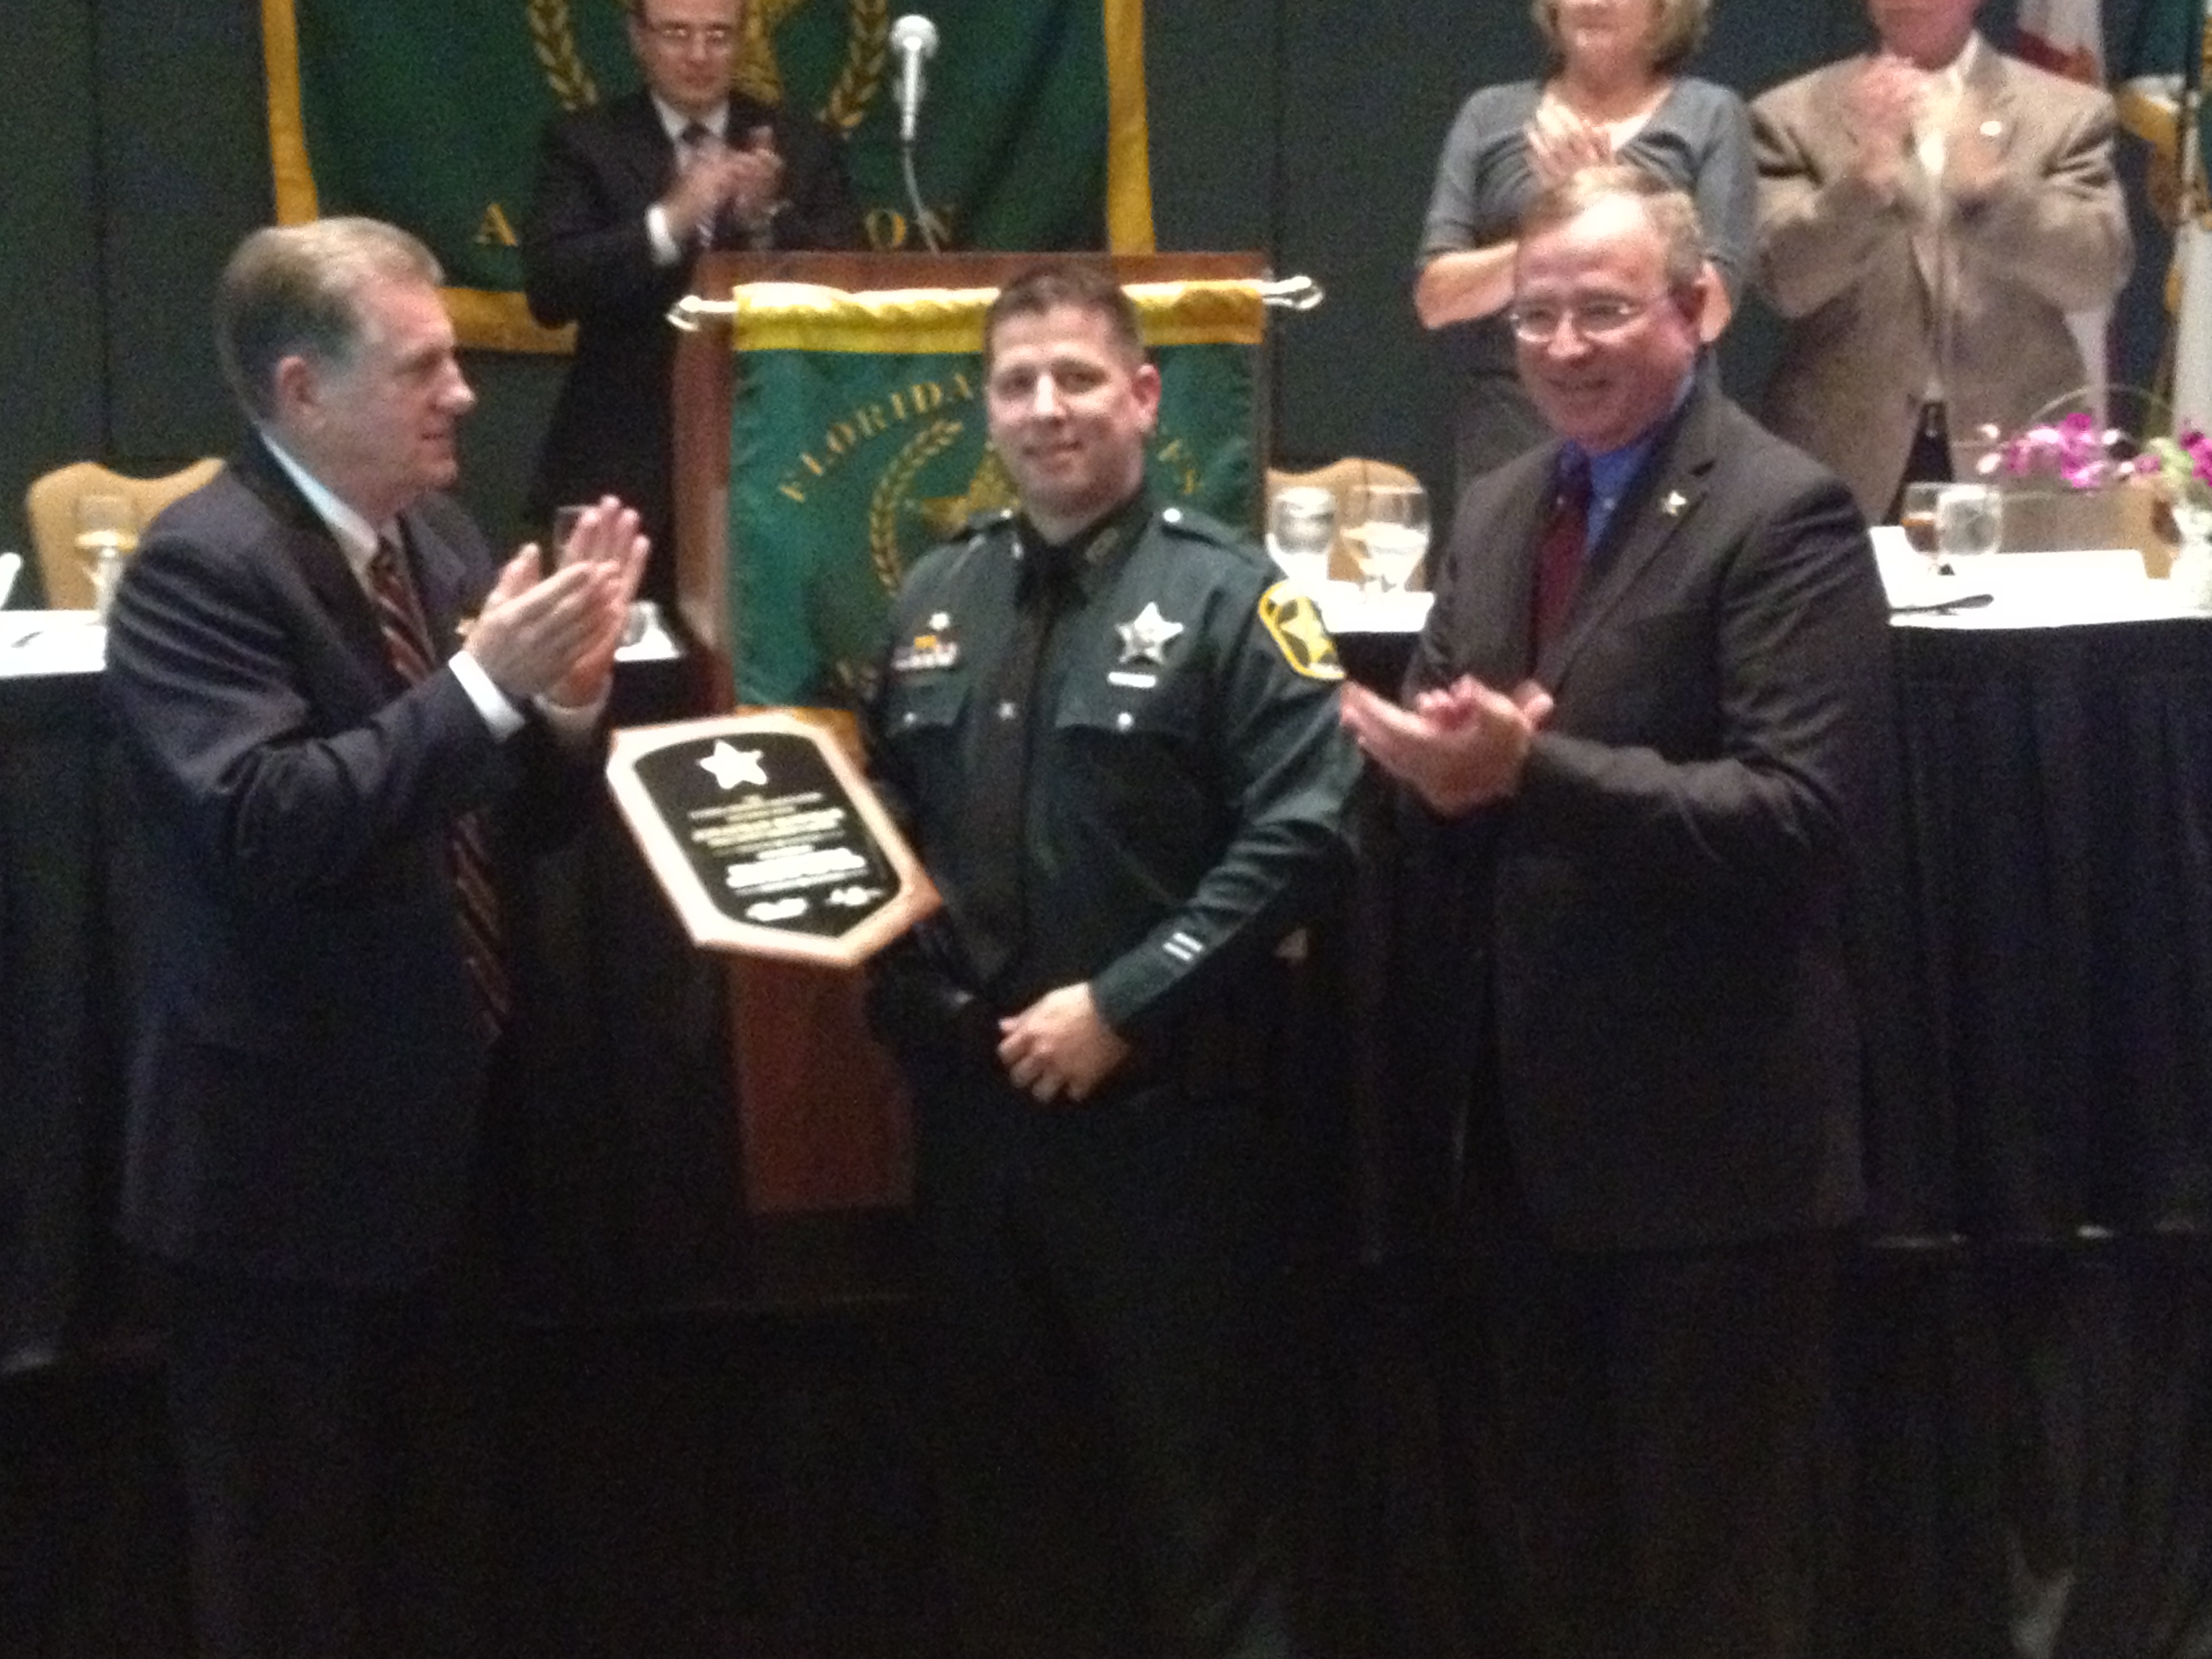 Deputy Bowman being honored as the FSA 2012  Corrections Officer of the Year